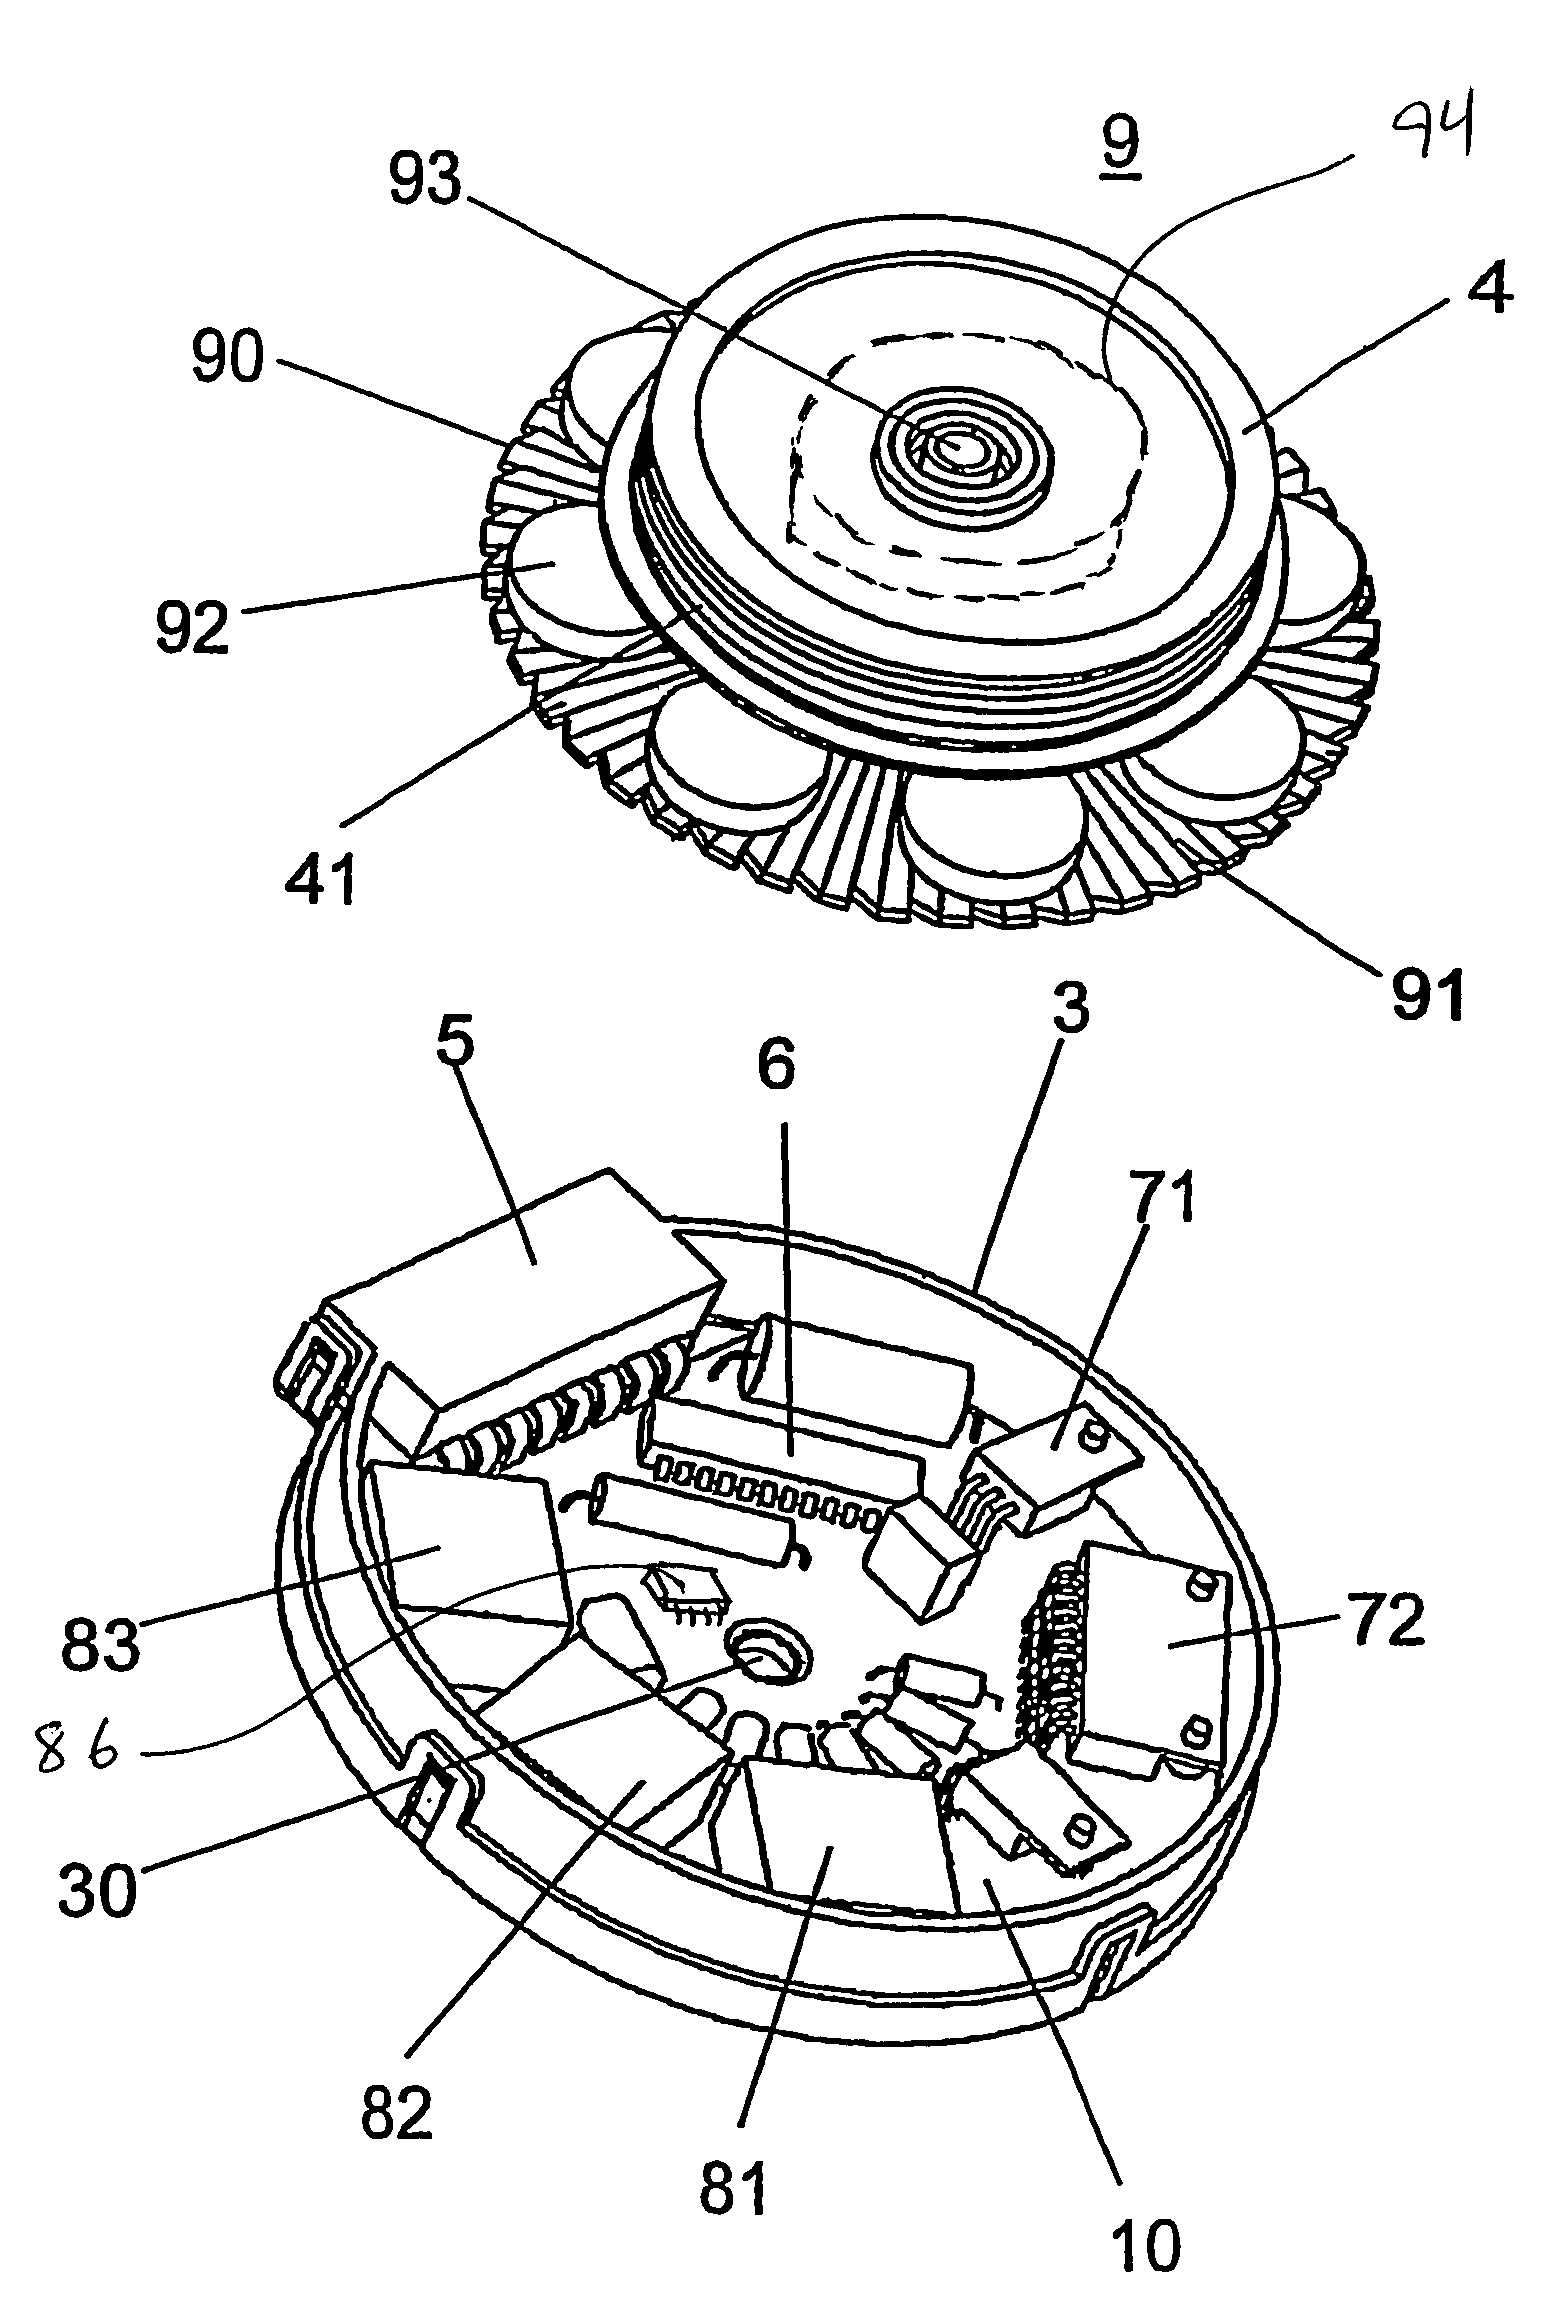 Drive unit comprising an electric motor for adjusting devices in motor vehicles